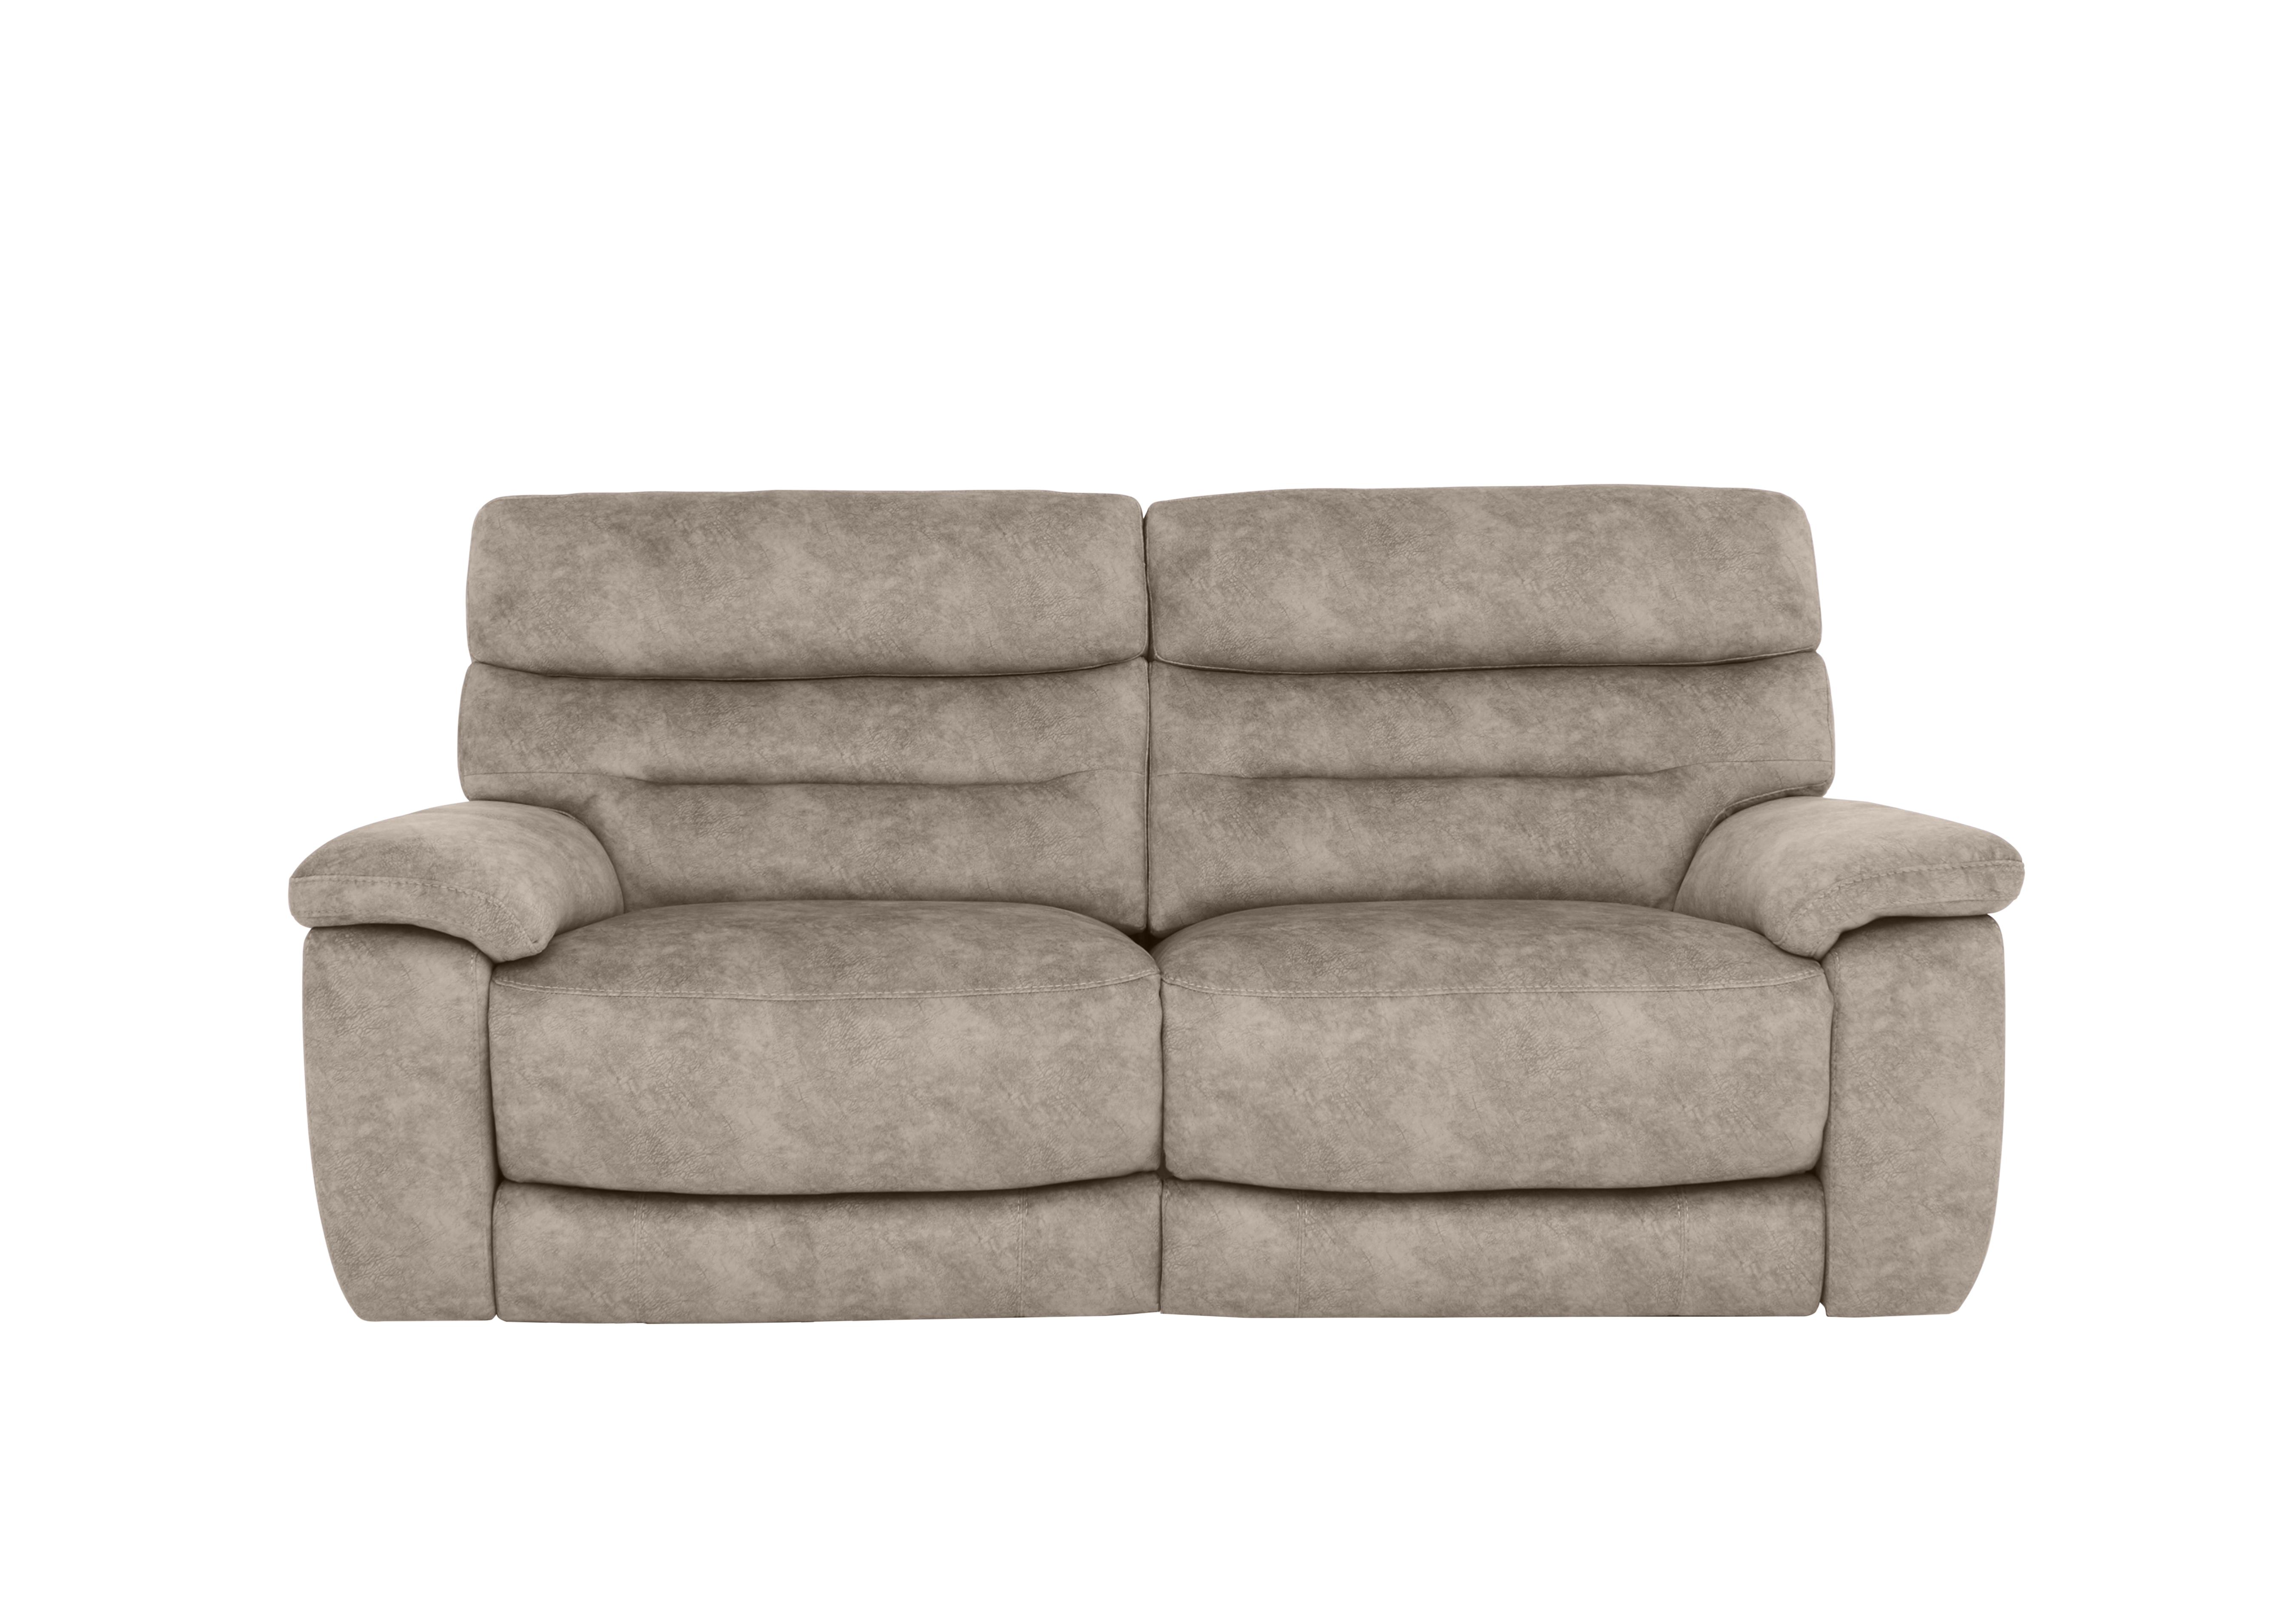 Nimbus 3 Seater Fabric Power Recliner Sofa with Power Headrests and Power Lumbar in Bfa-Bnn-R29 Mink on Furniture Village